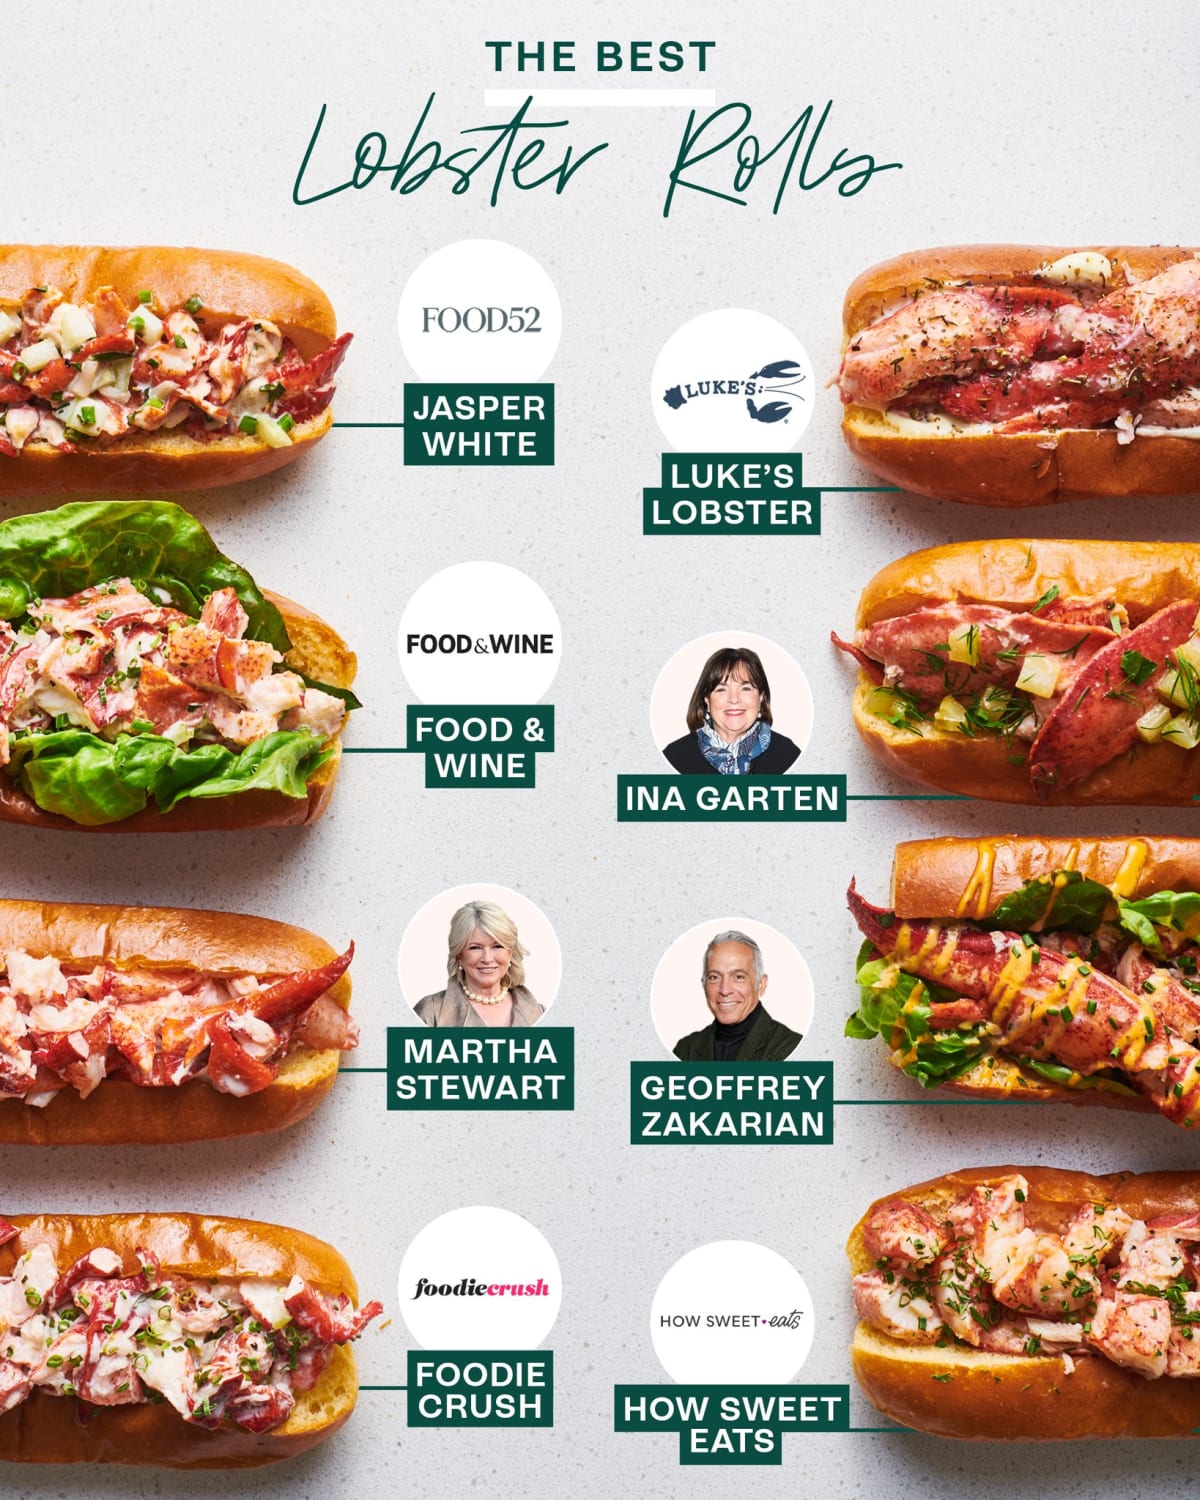 @saratane tried 8 popular lobster roll recipes and the winner blew her away: